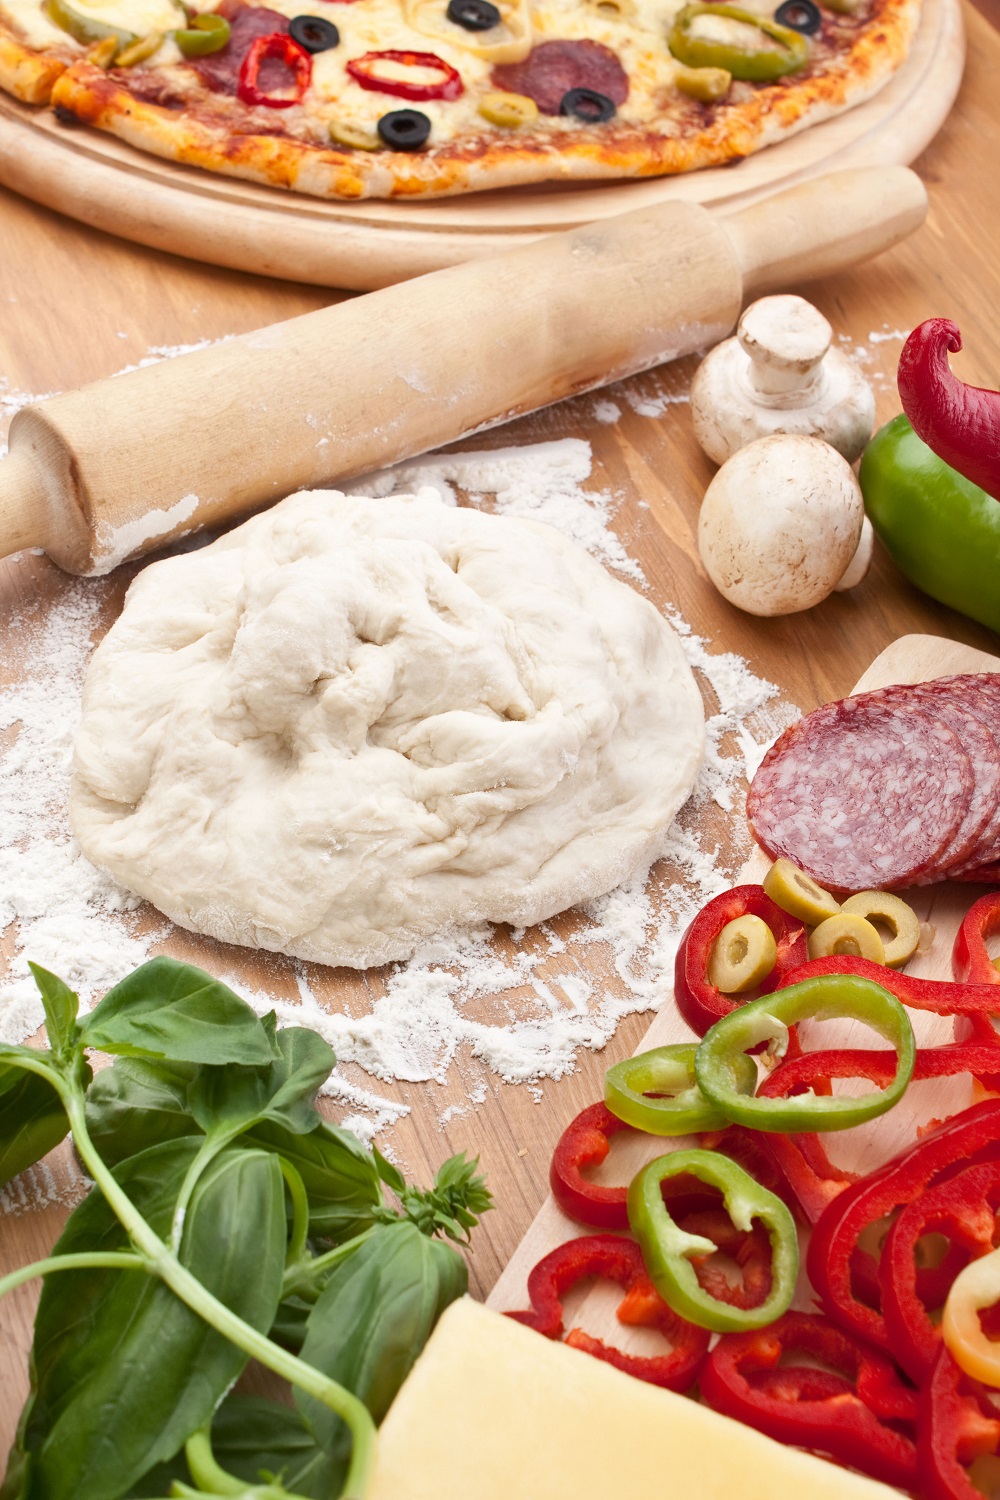 Pizza Dough and pizza